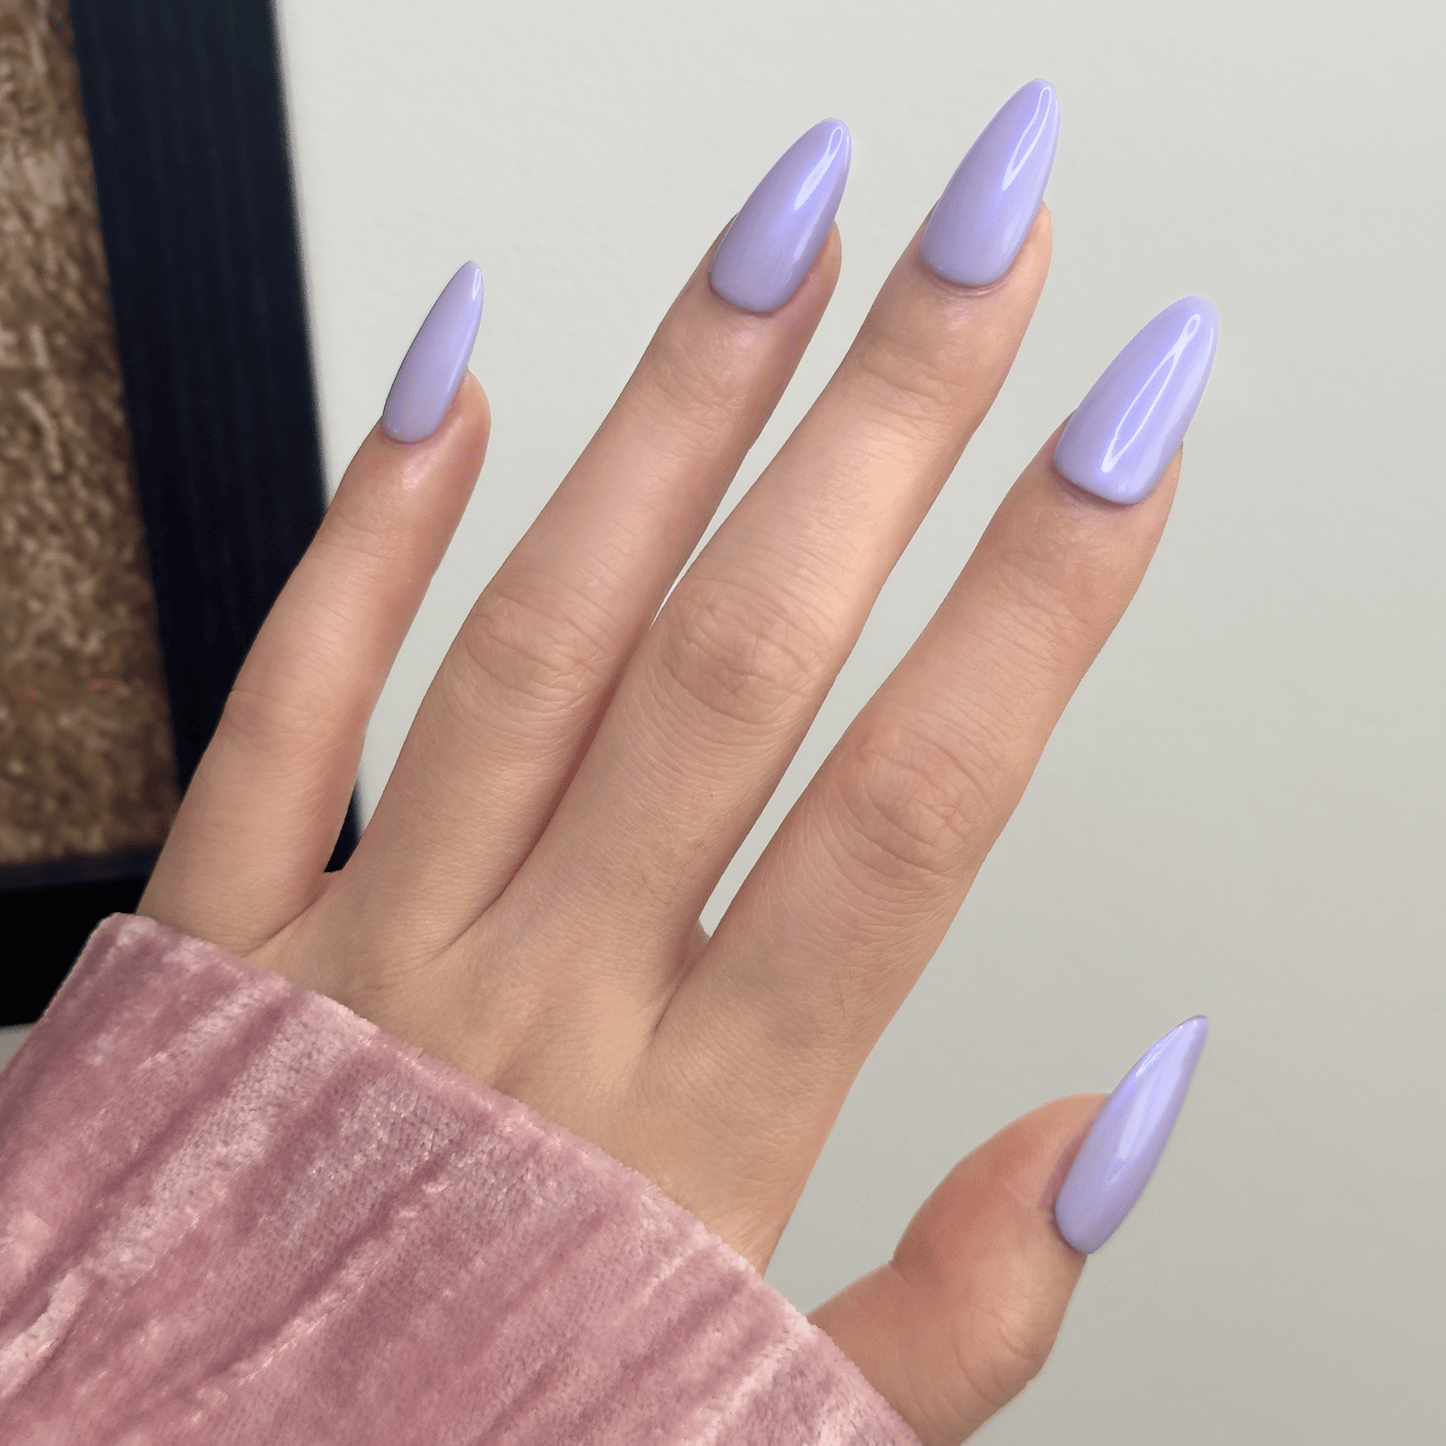 Back-view of a hand wearing MyLilith's purple lavender press-on nails with a glossy glazed finish, giving off blue hues, in a medium-length oval shape.